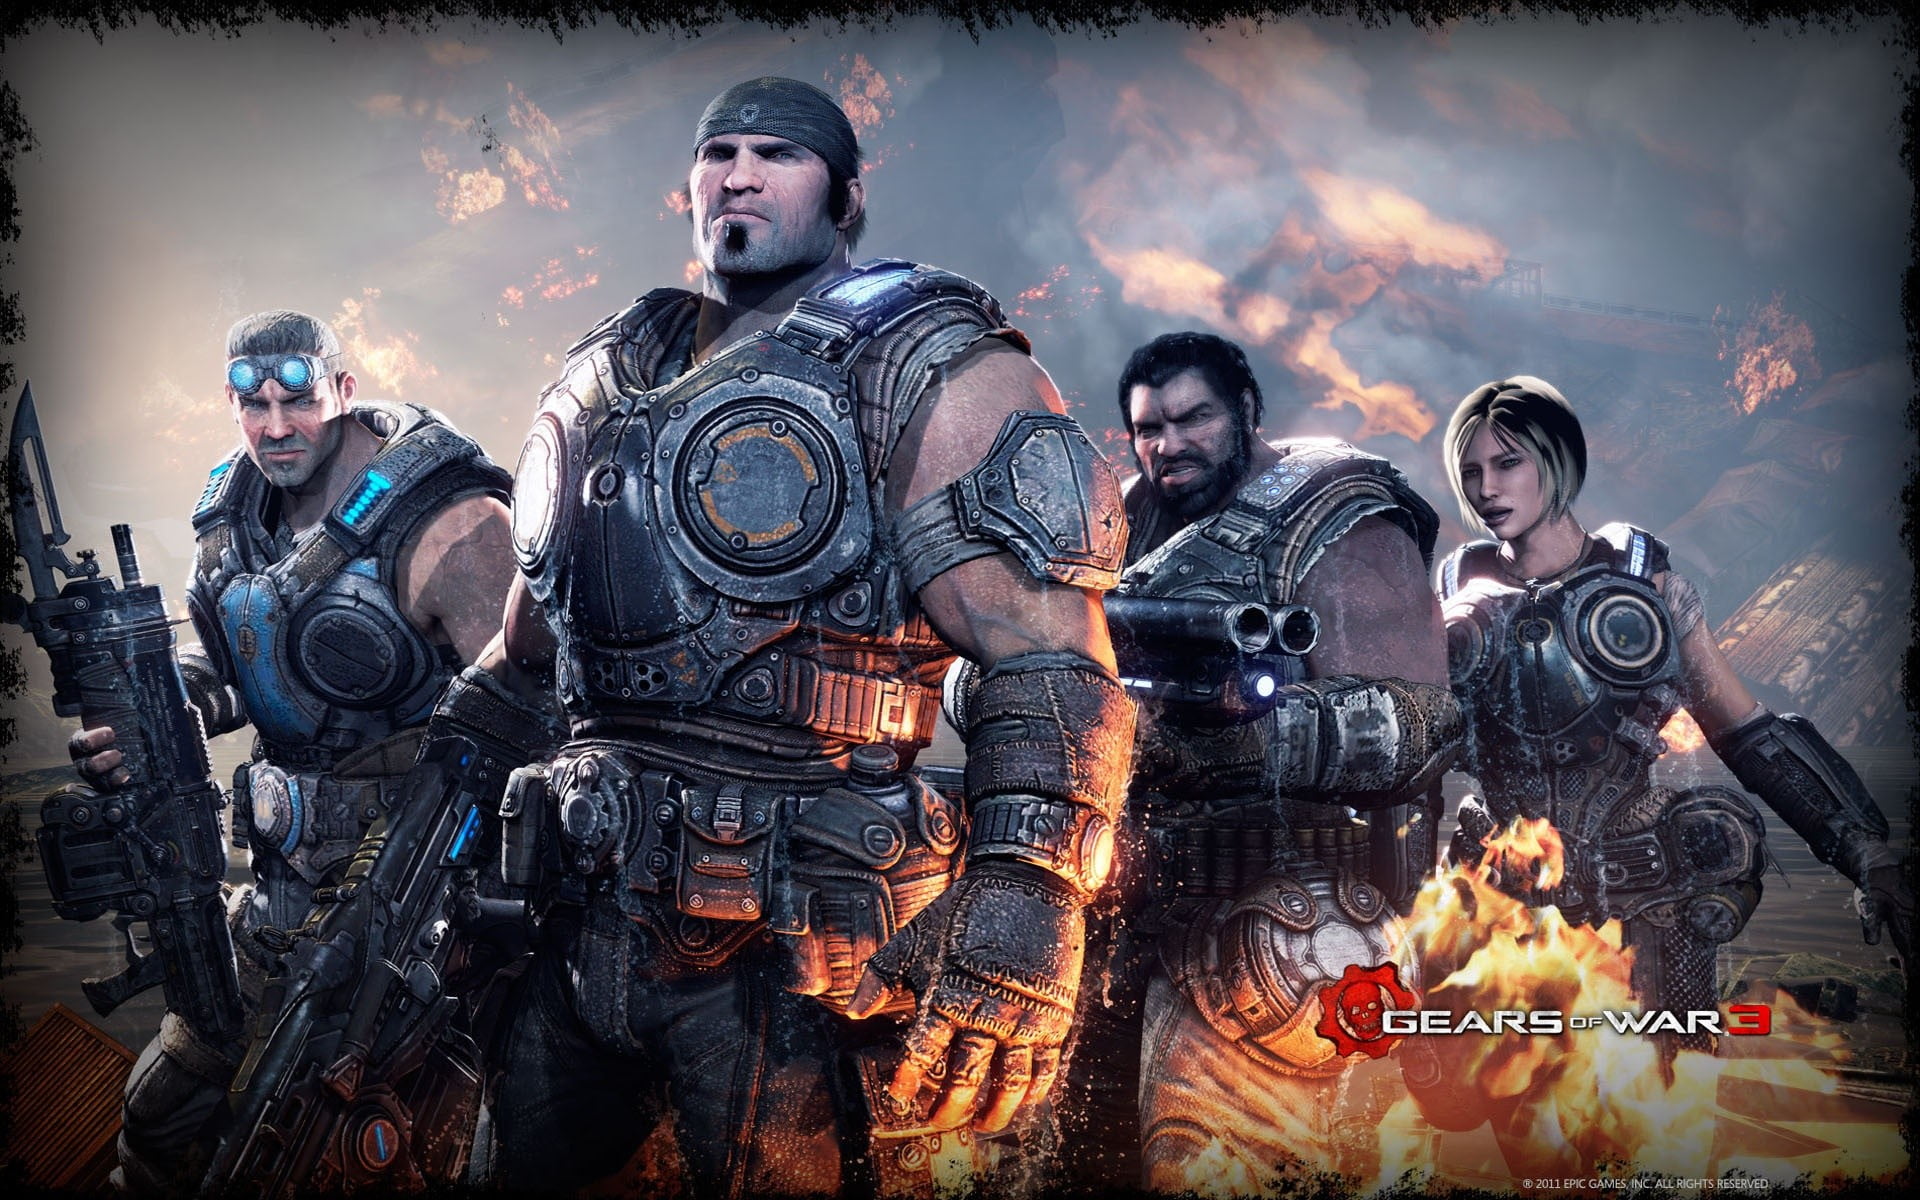 Gears of War 3 game wallpaper, young men, young adult, people